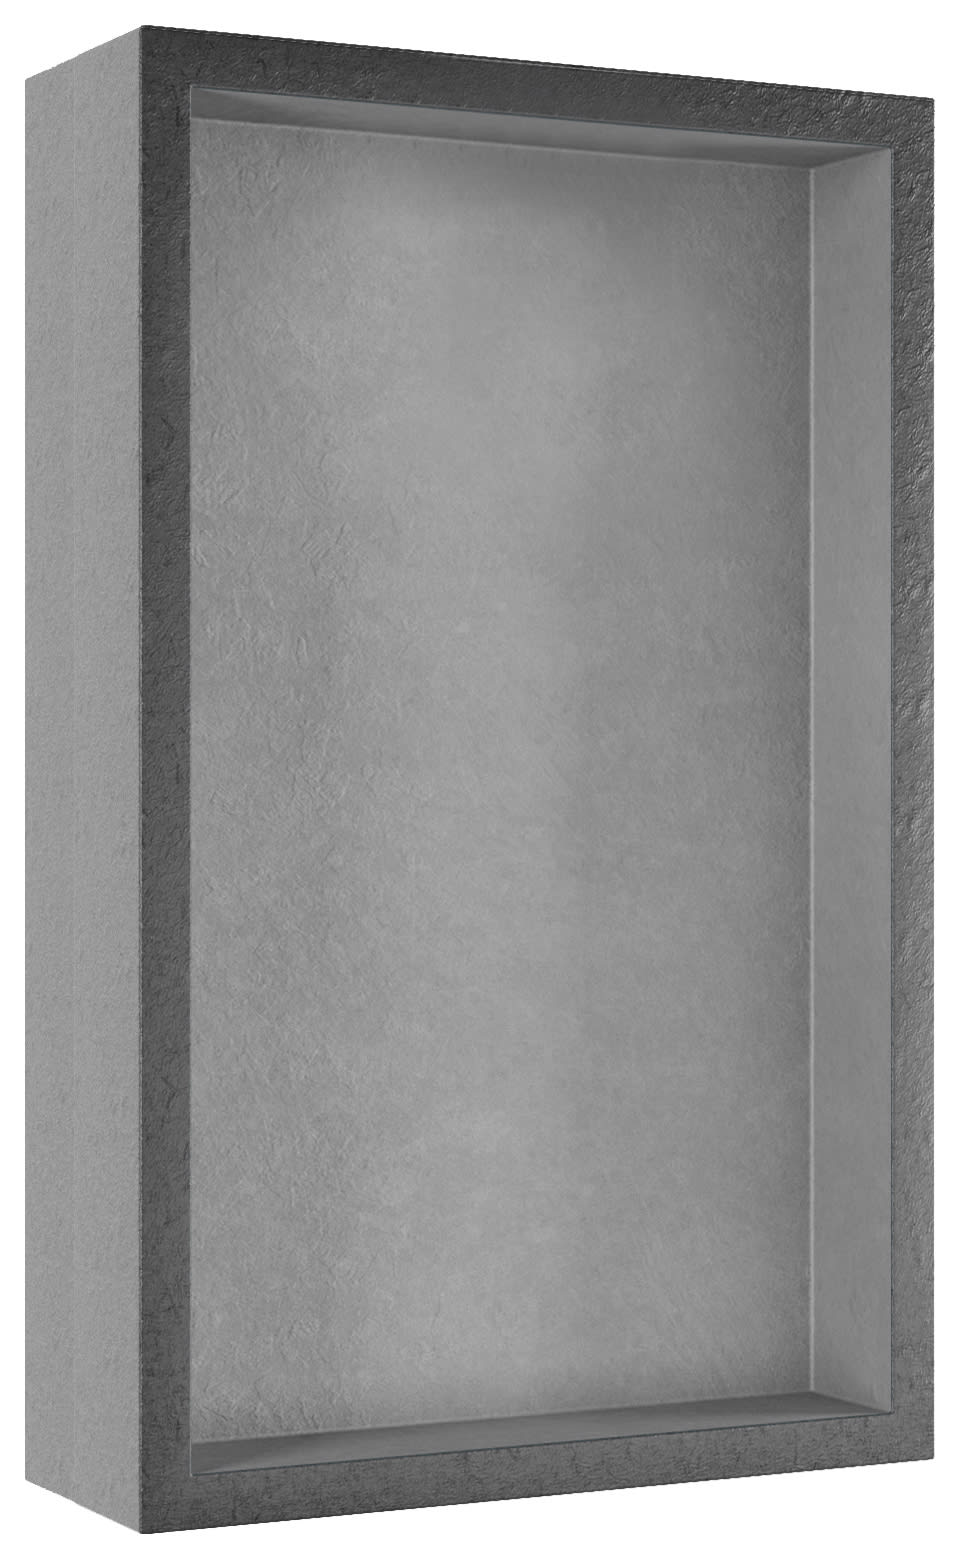 Abacus Pre-finished Metallic Zinc Effect Recessed Bathroom